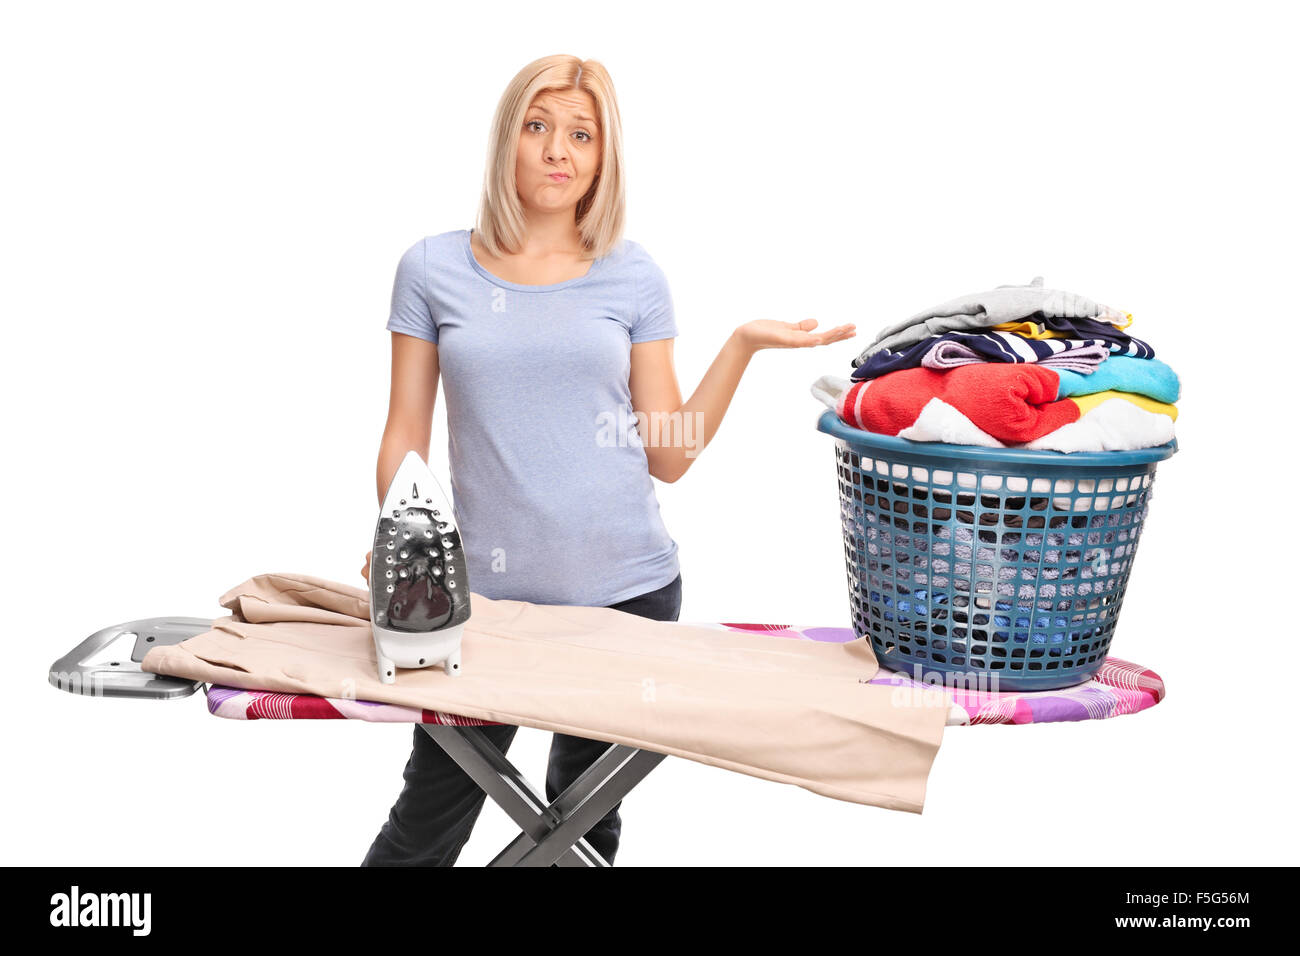 16,435 Woman Ironing Cloth On Board Images, Stock Photos, 3D objects, &  Vectors